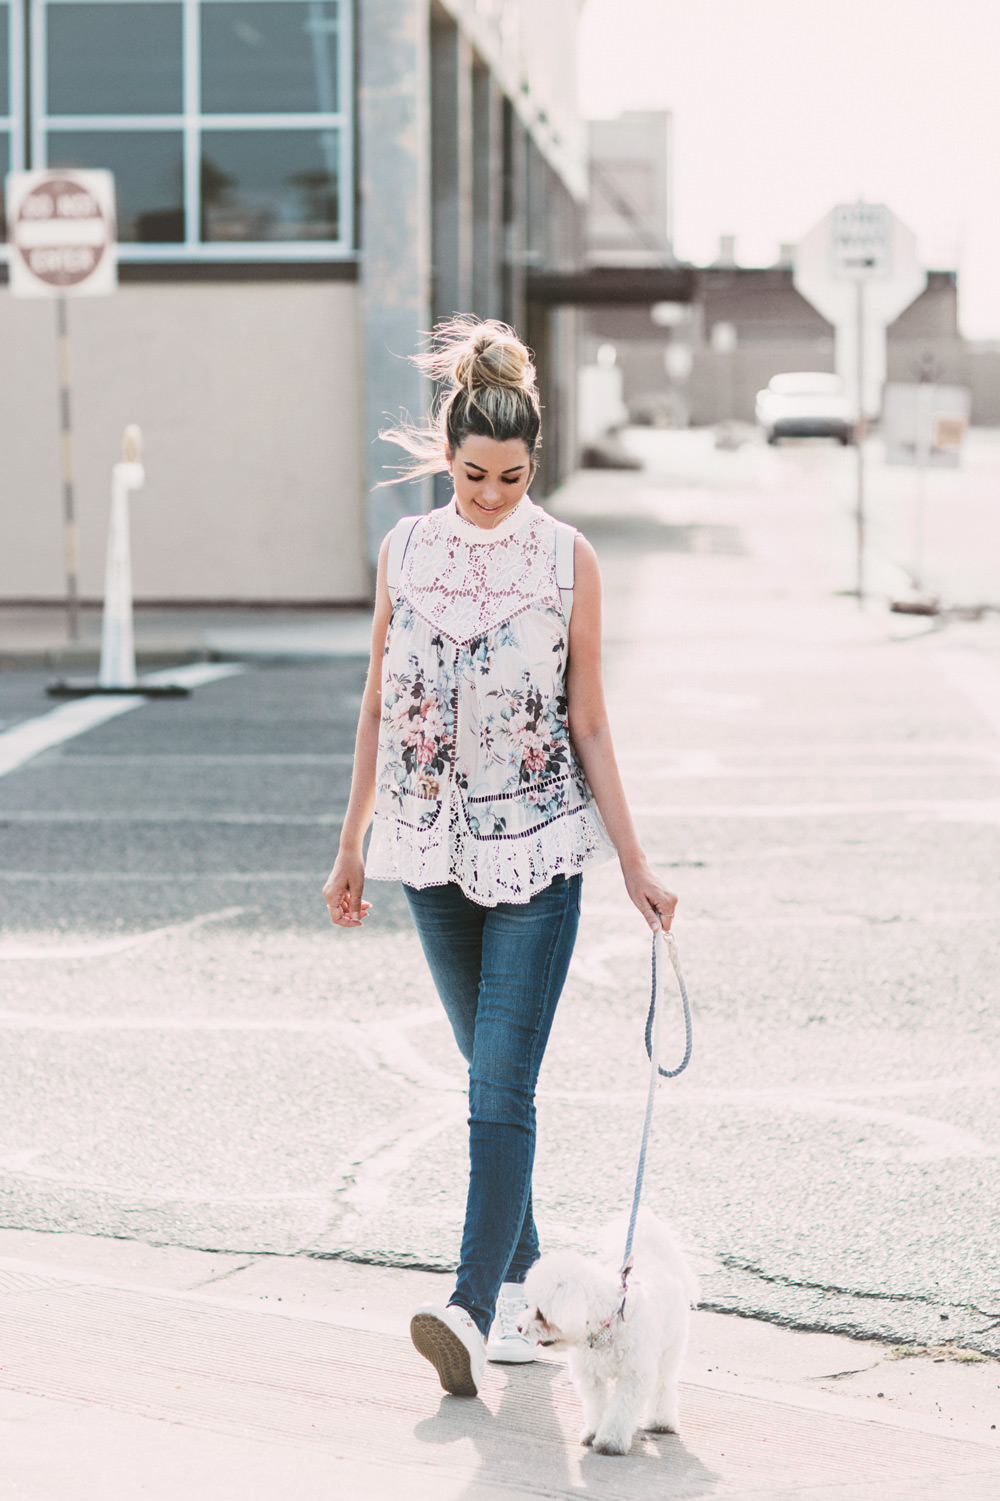 Caitlin Lindquist of the Arizona fashion blog Dash of Darling shares a casual outfit wearing a floral top, white backpack and spring sneakers